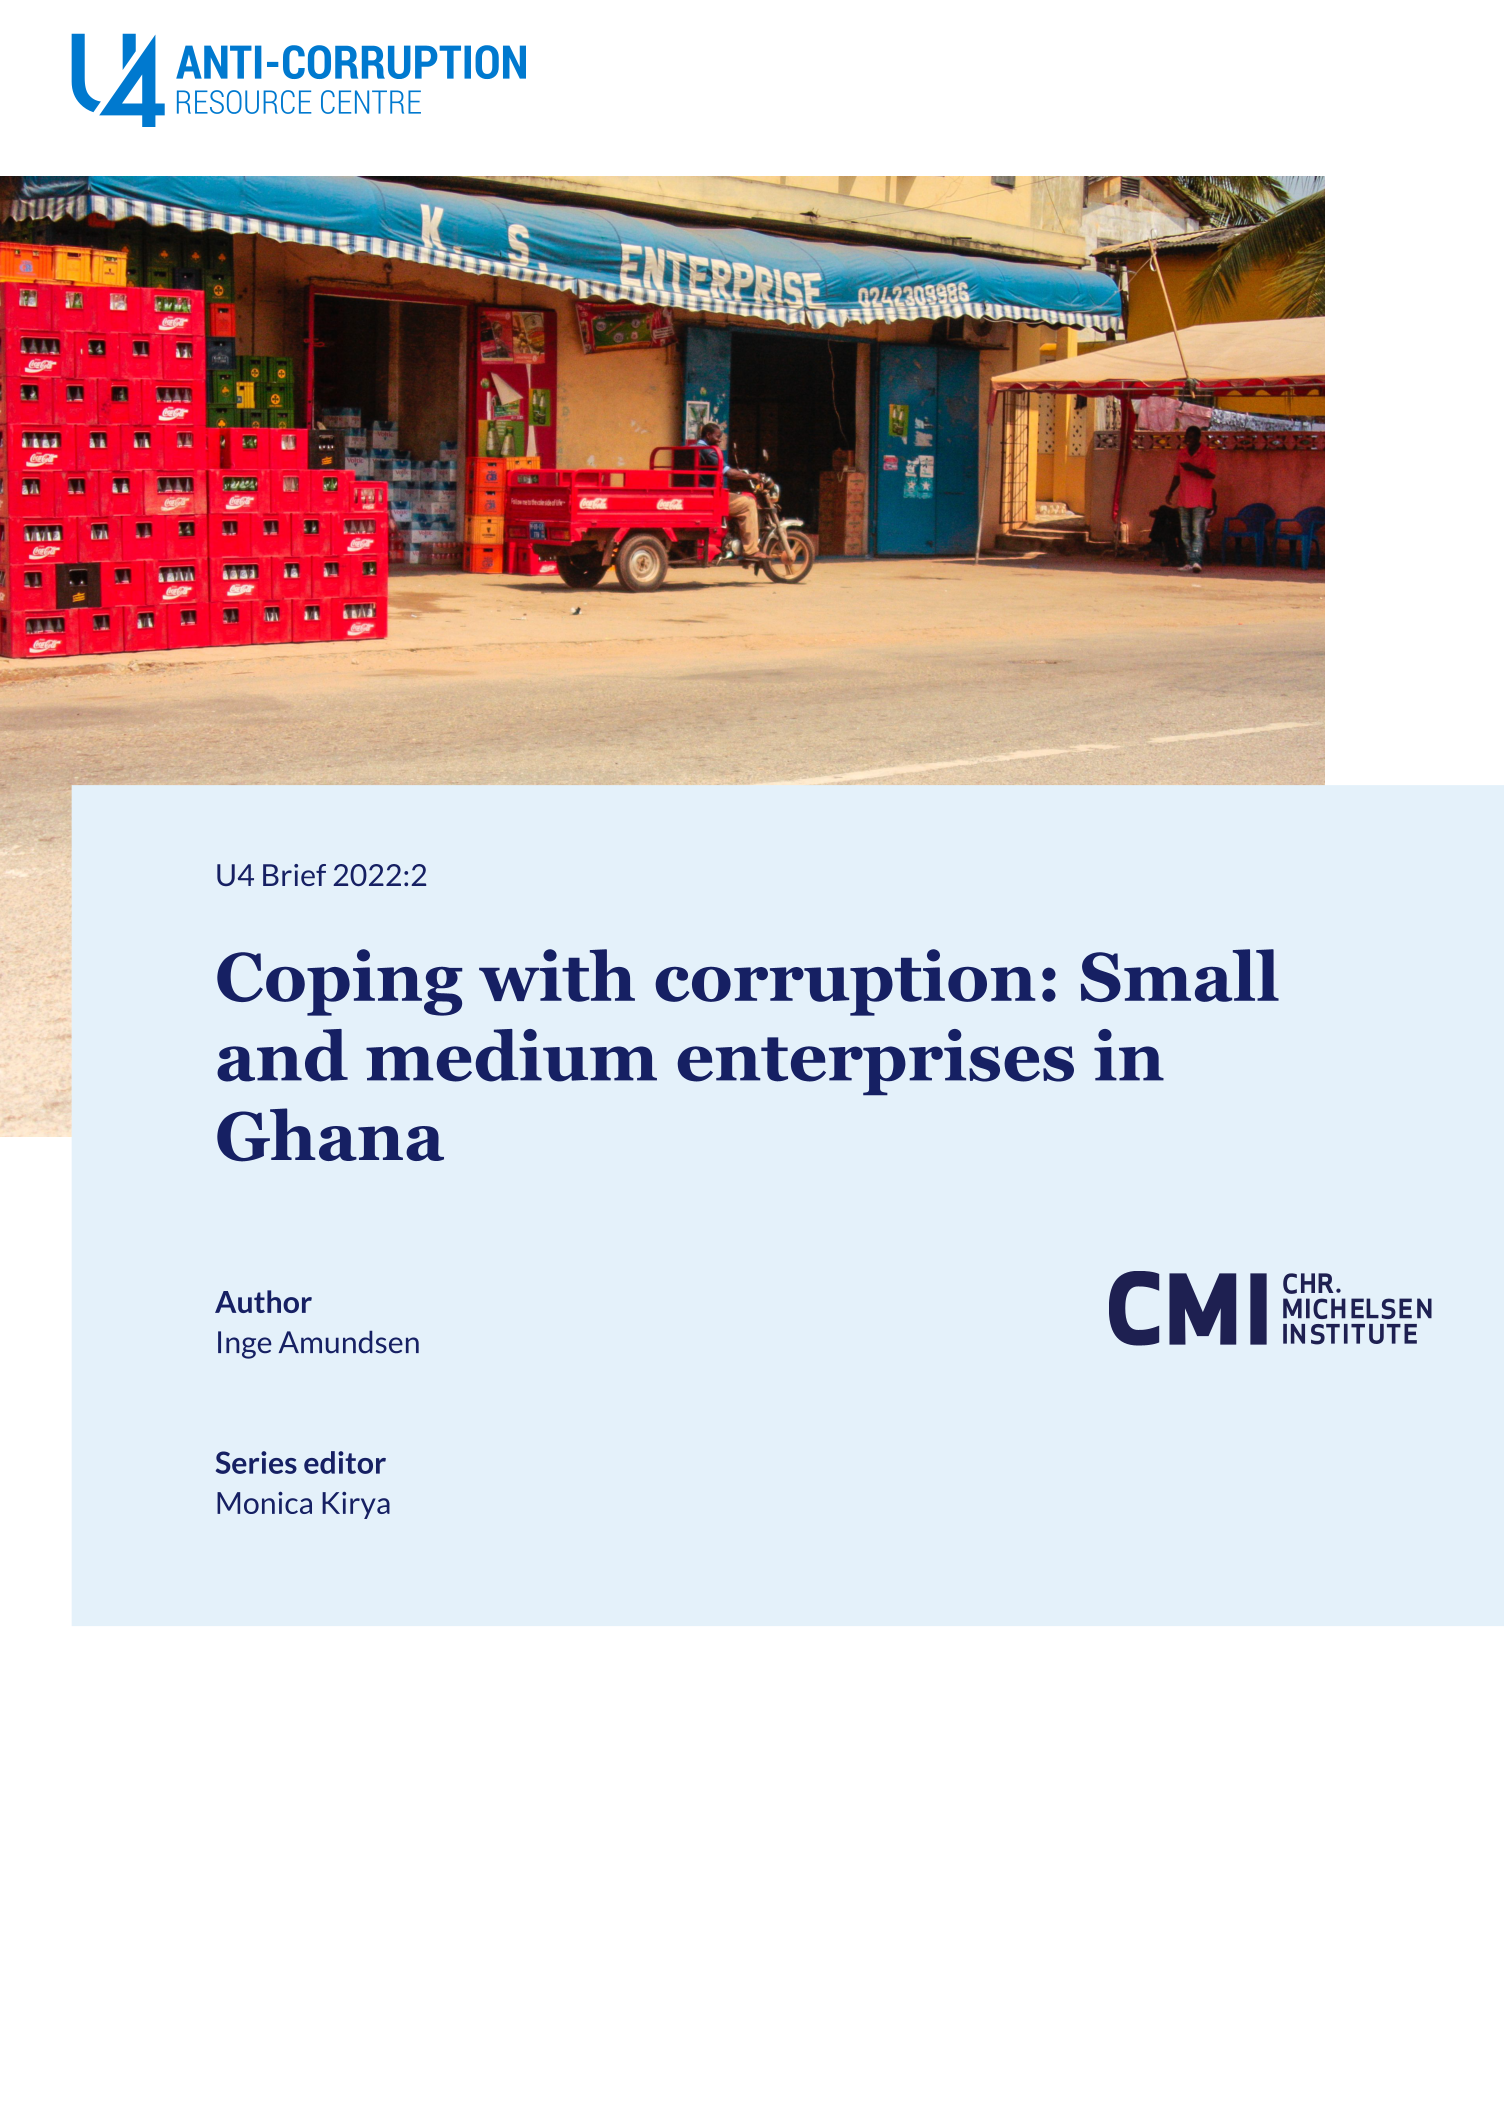 Coping with corruption: Small and medium enterprises in Ghana